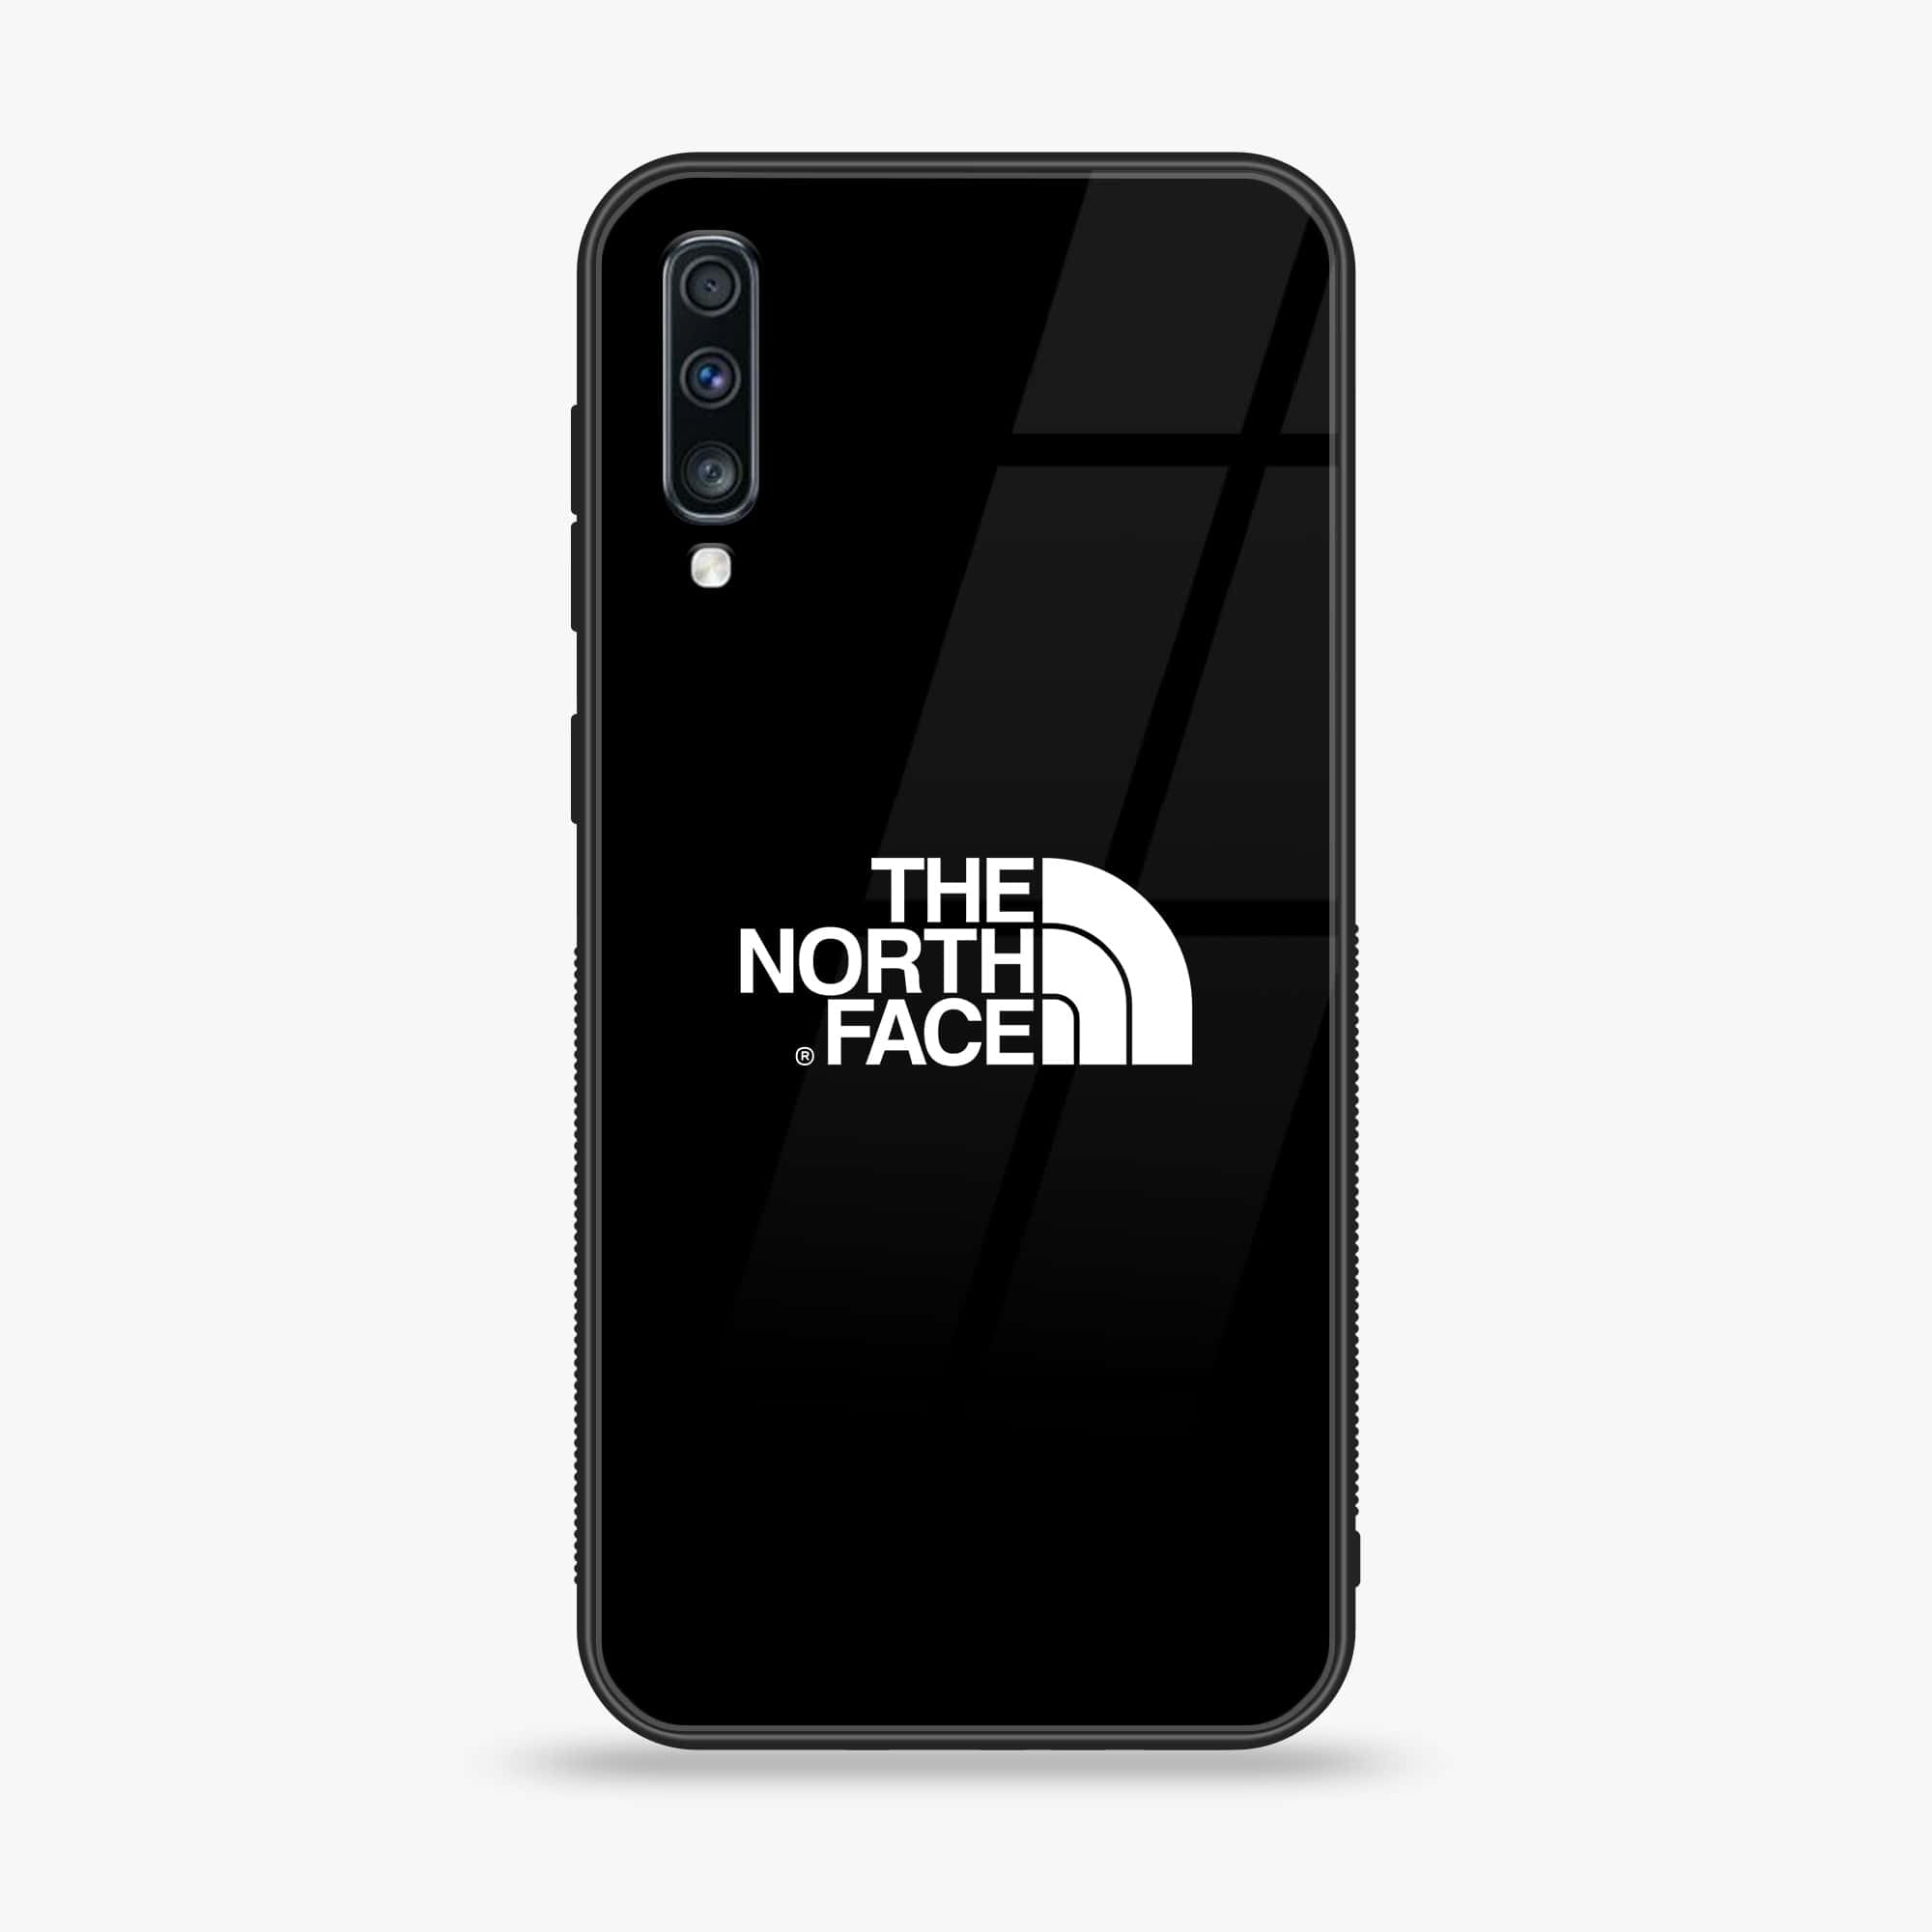 Samsung Galaxy A70 - The North Face Series - Premium Printed Glass soft Bumper shock Proof Case